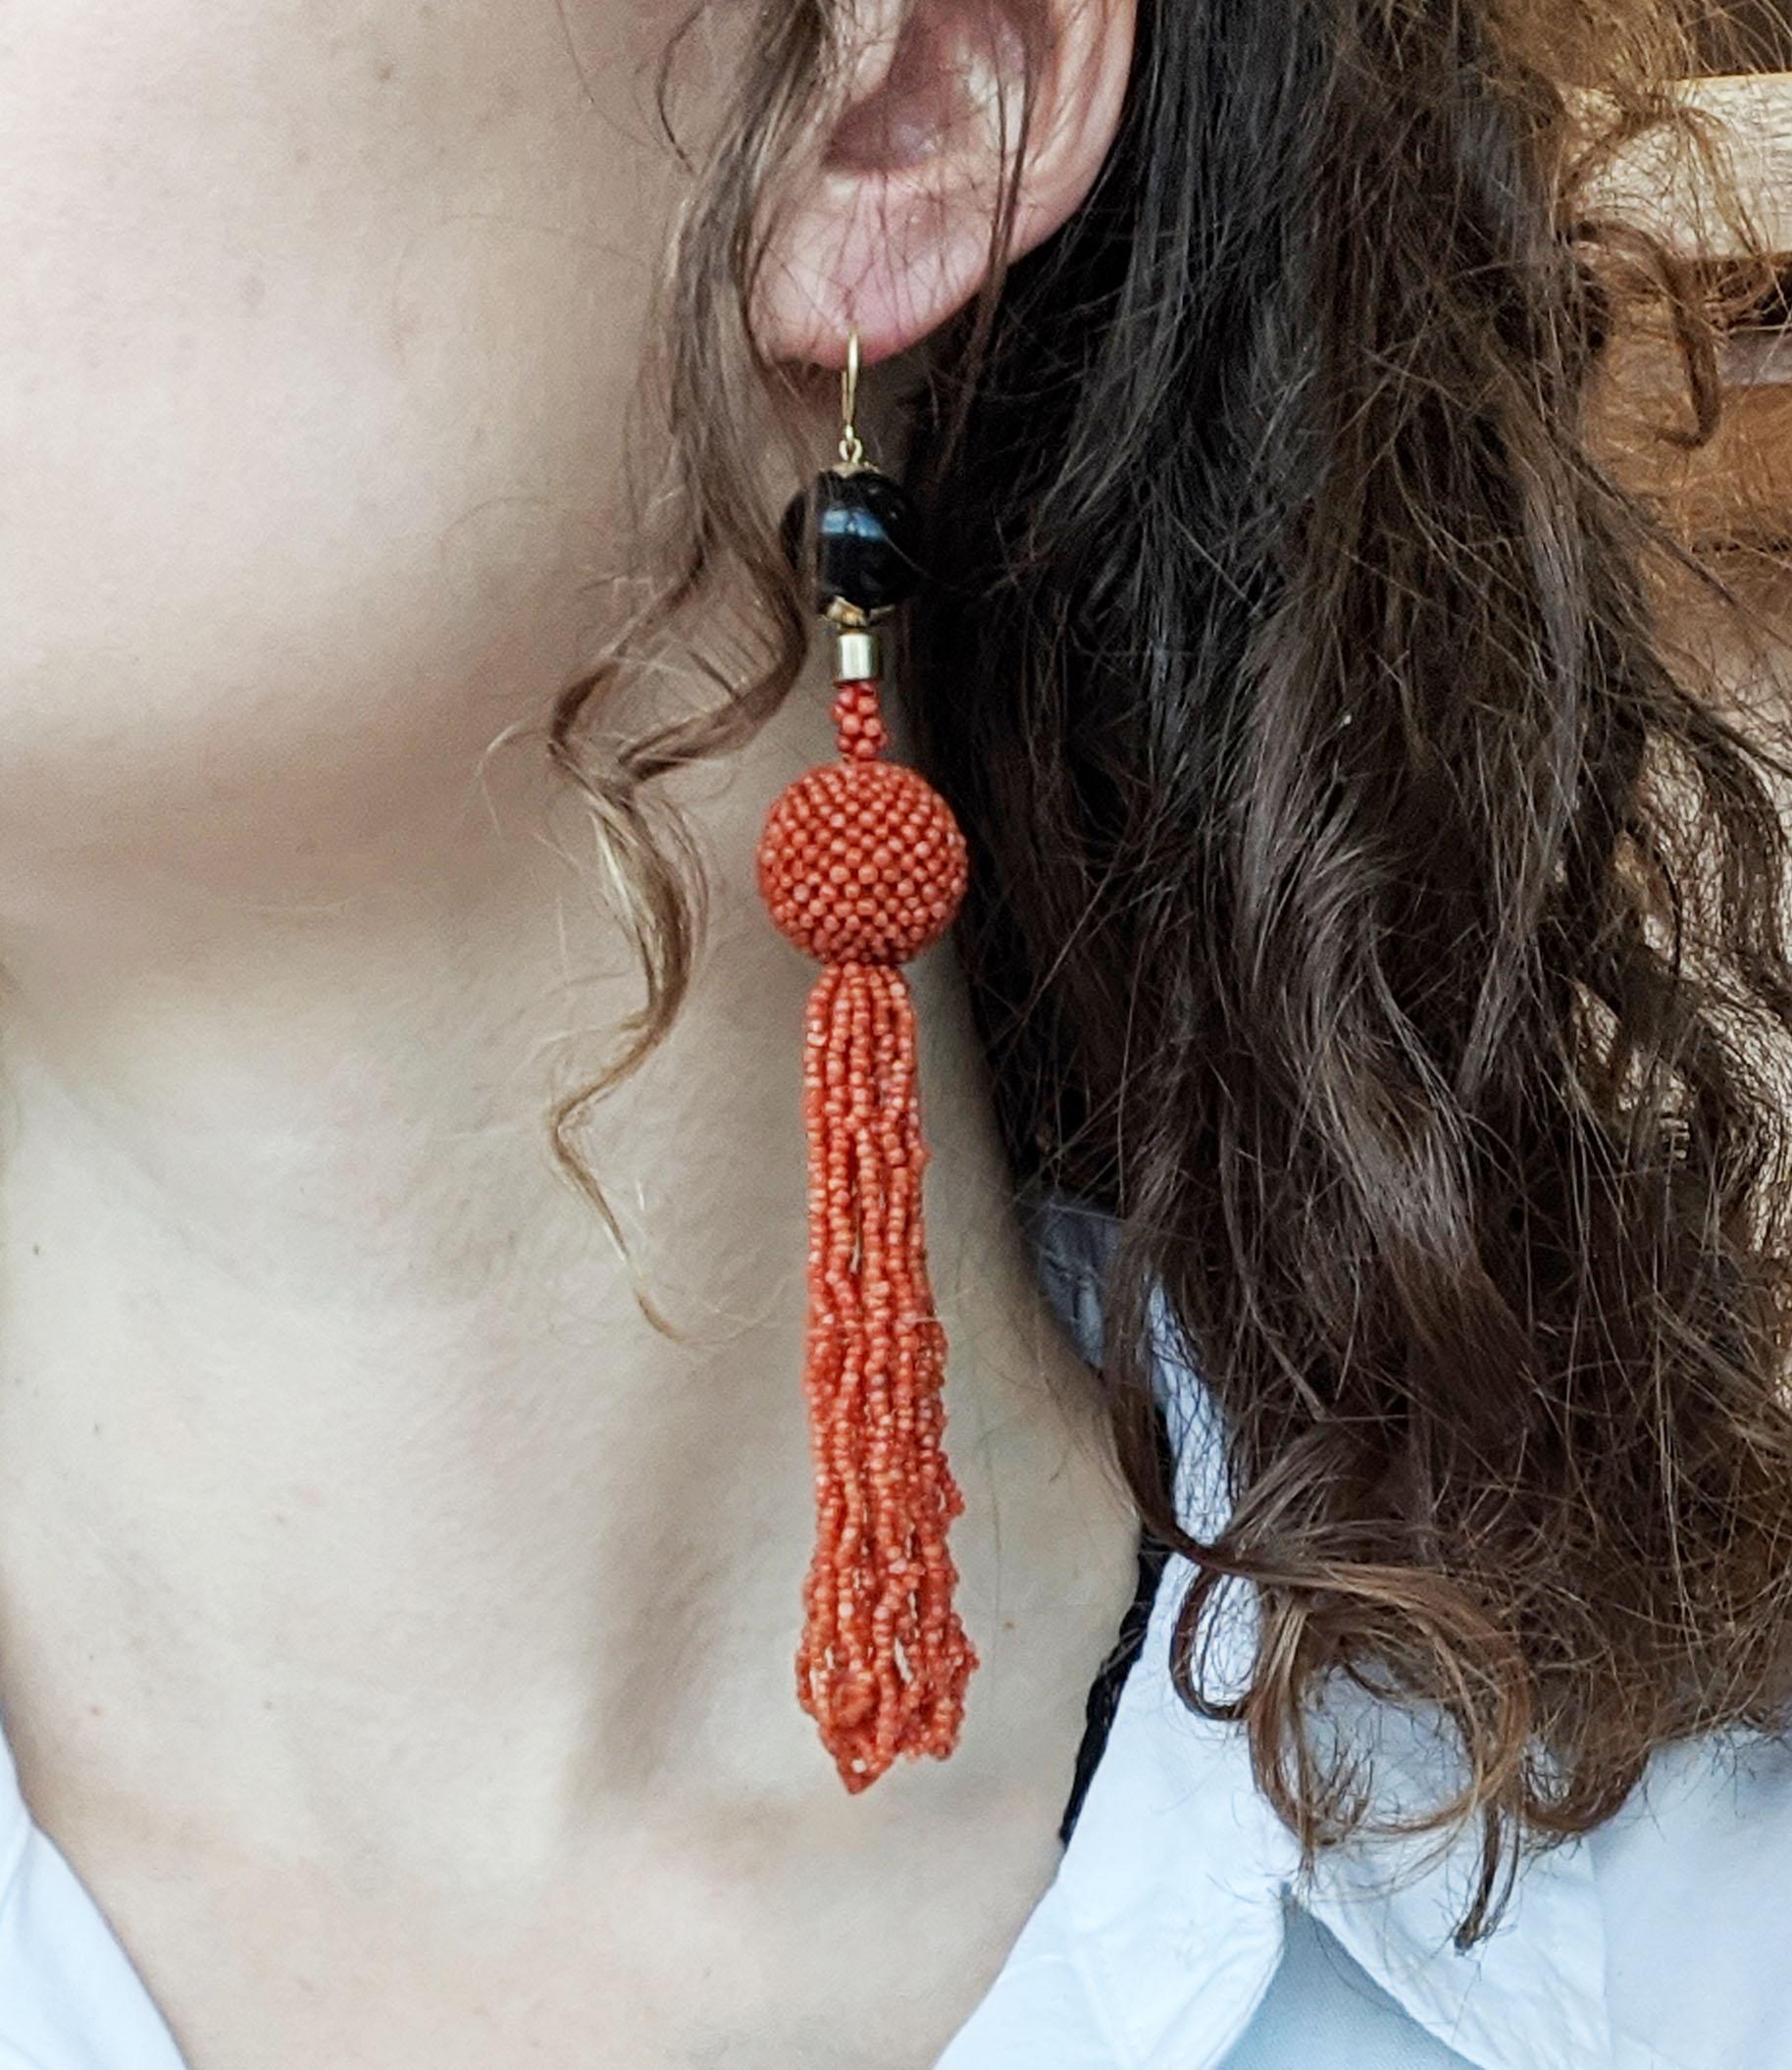 These are an incredible pair of unique Art Deco earrings in 18k yellow gold with a black onyx holding a long beaded coral looped fringes! These earrings are truly unlike any others you have seen! The dramatic combination of black and bright red,